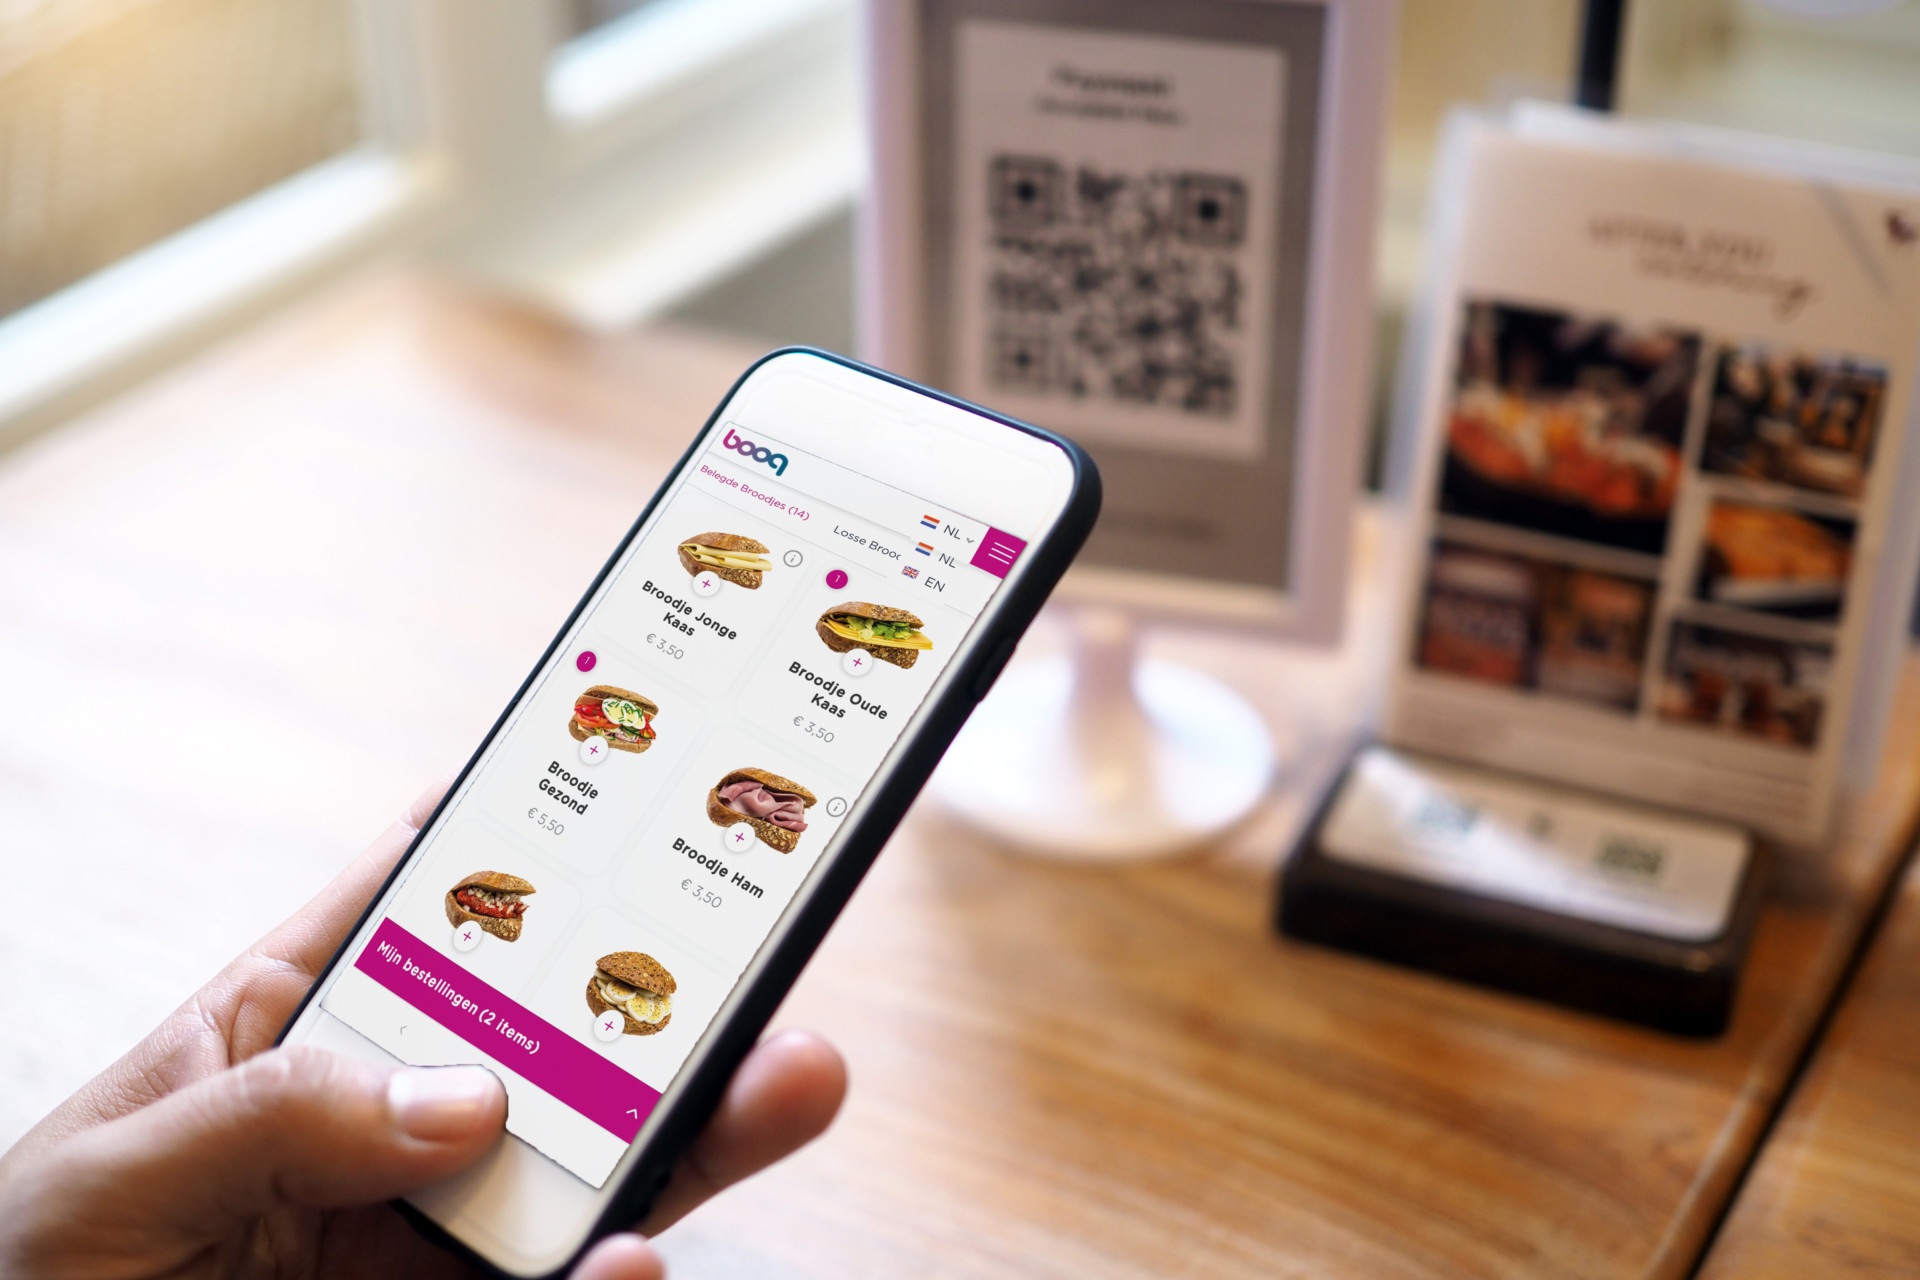 Hands use the phone to scan QR codes to accumulate points in restaurants.